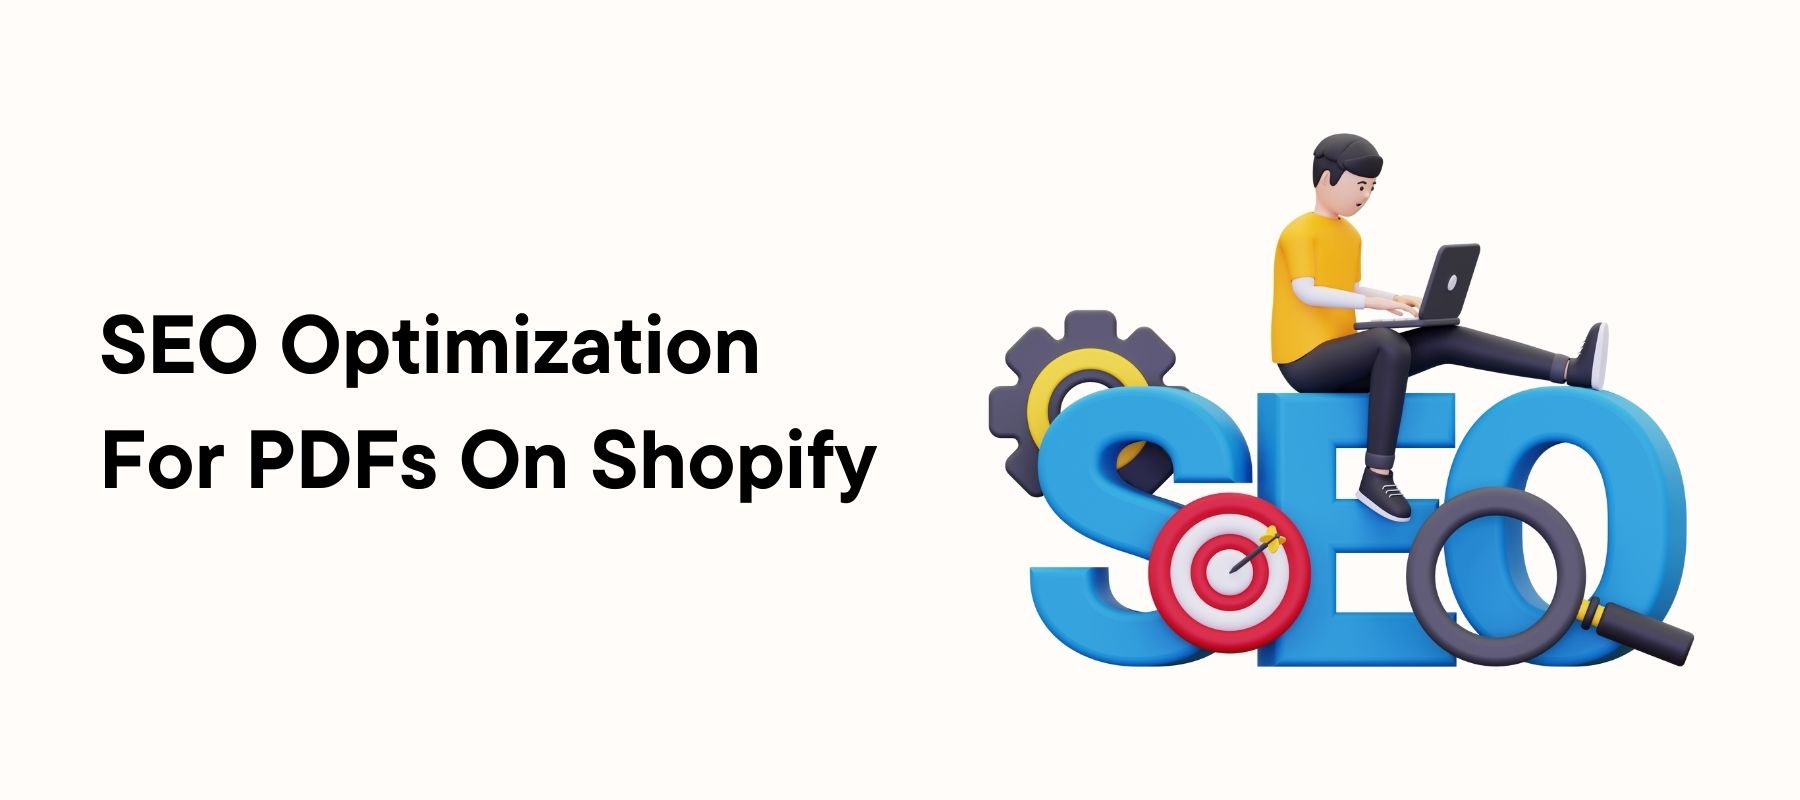 SEO Optimization For PDFs On Shopify